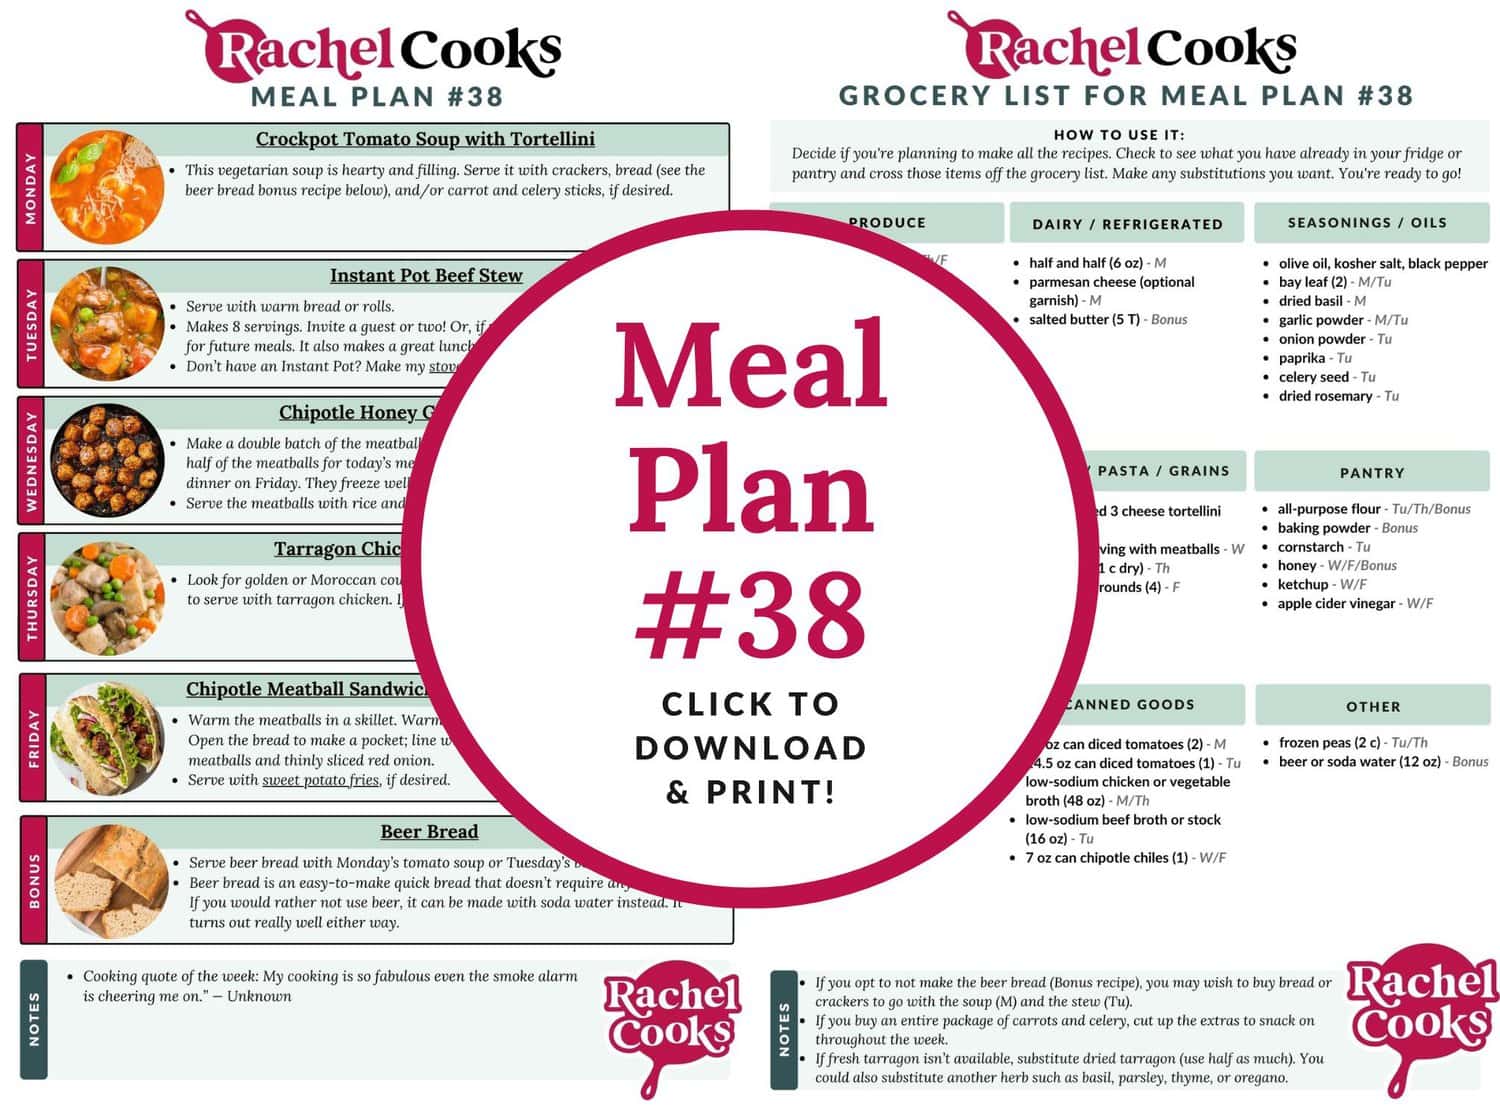 Meal plan 38 preview image.